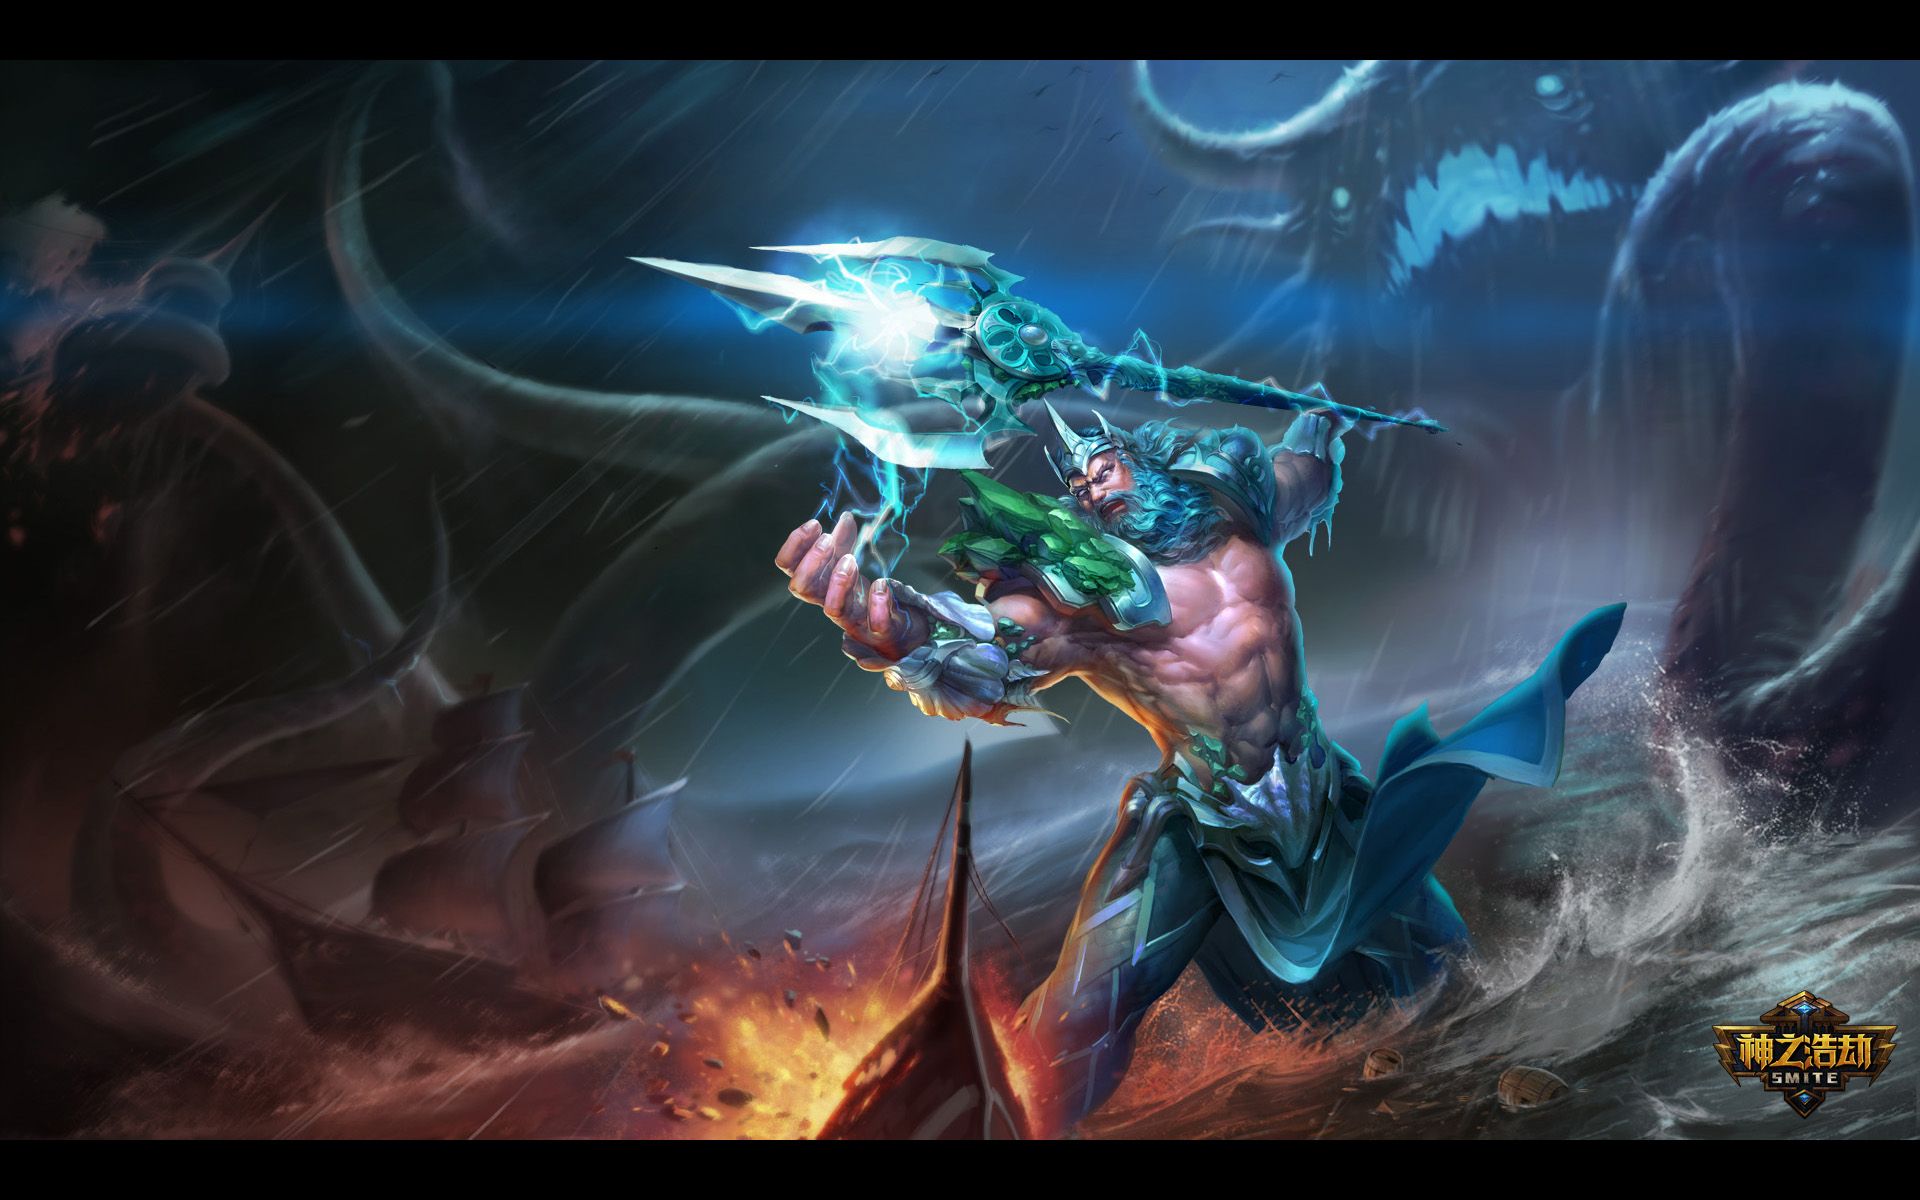 Why doesn't Hirez release official wallpapers for each God? : Smite